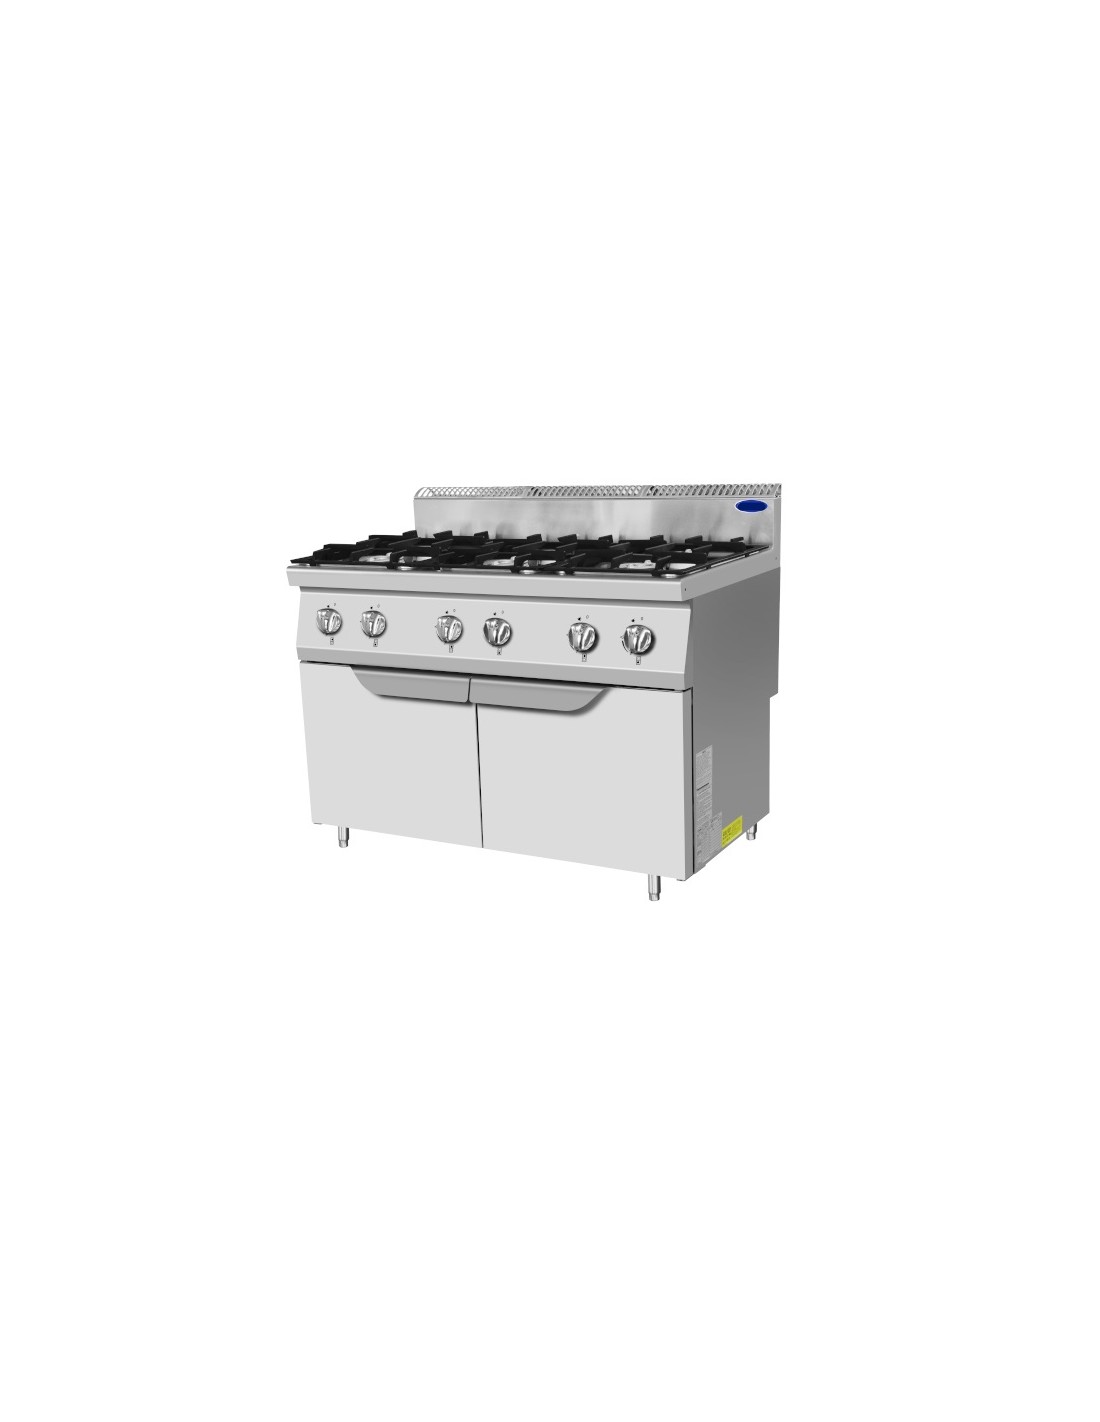 Gas cooker - Model AT8G7B-F2